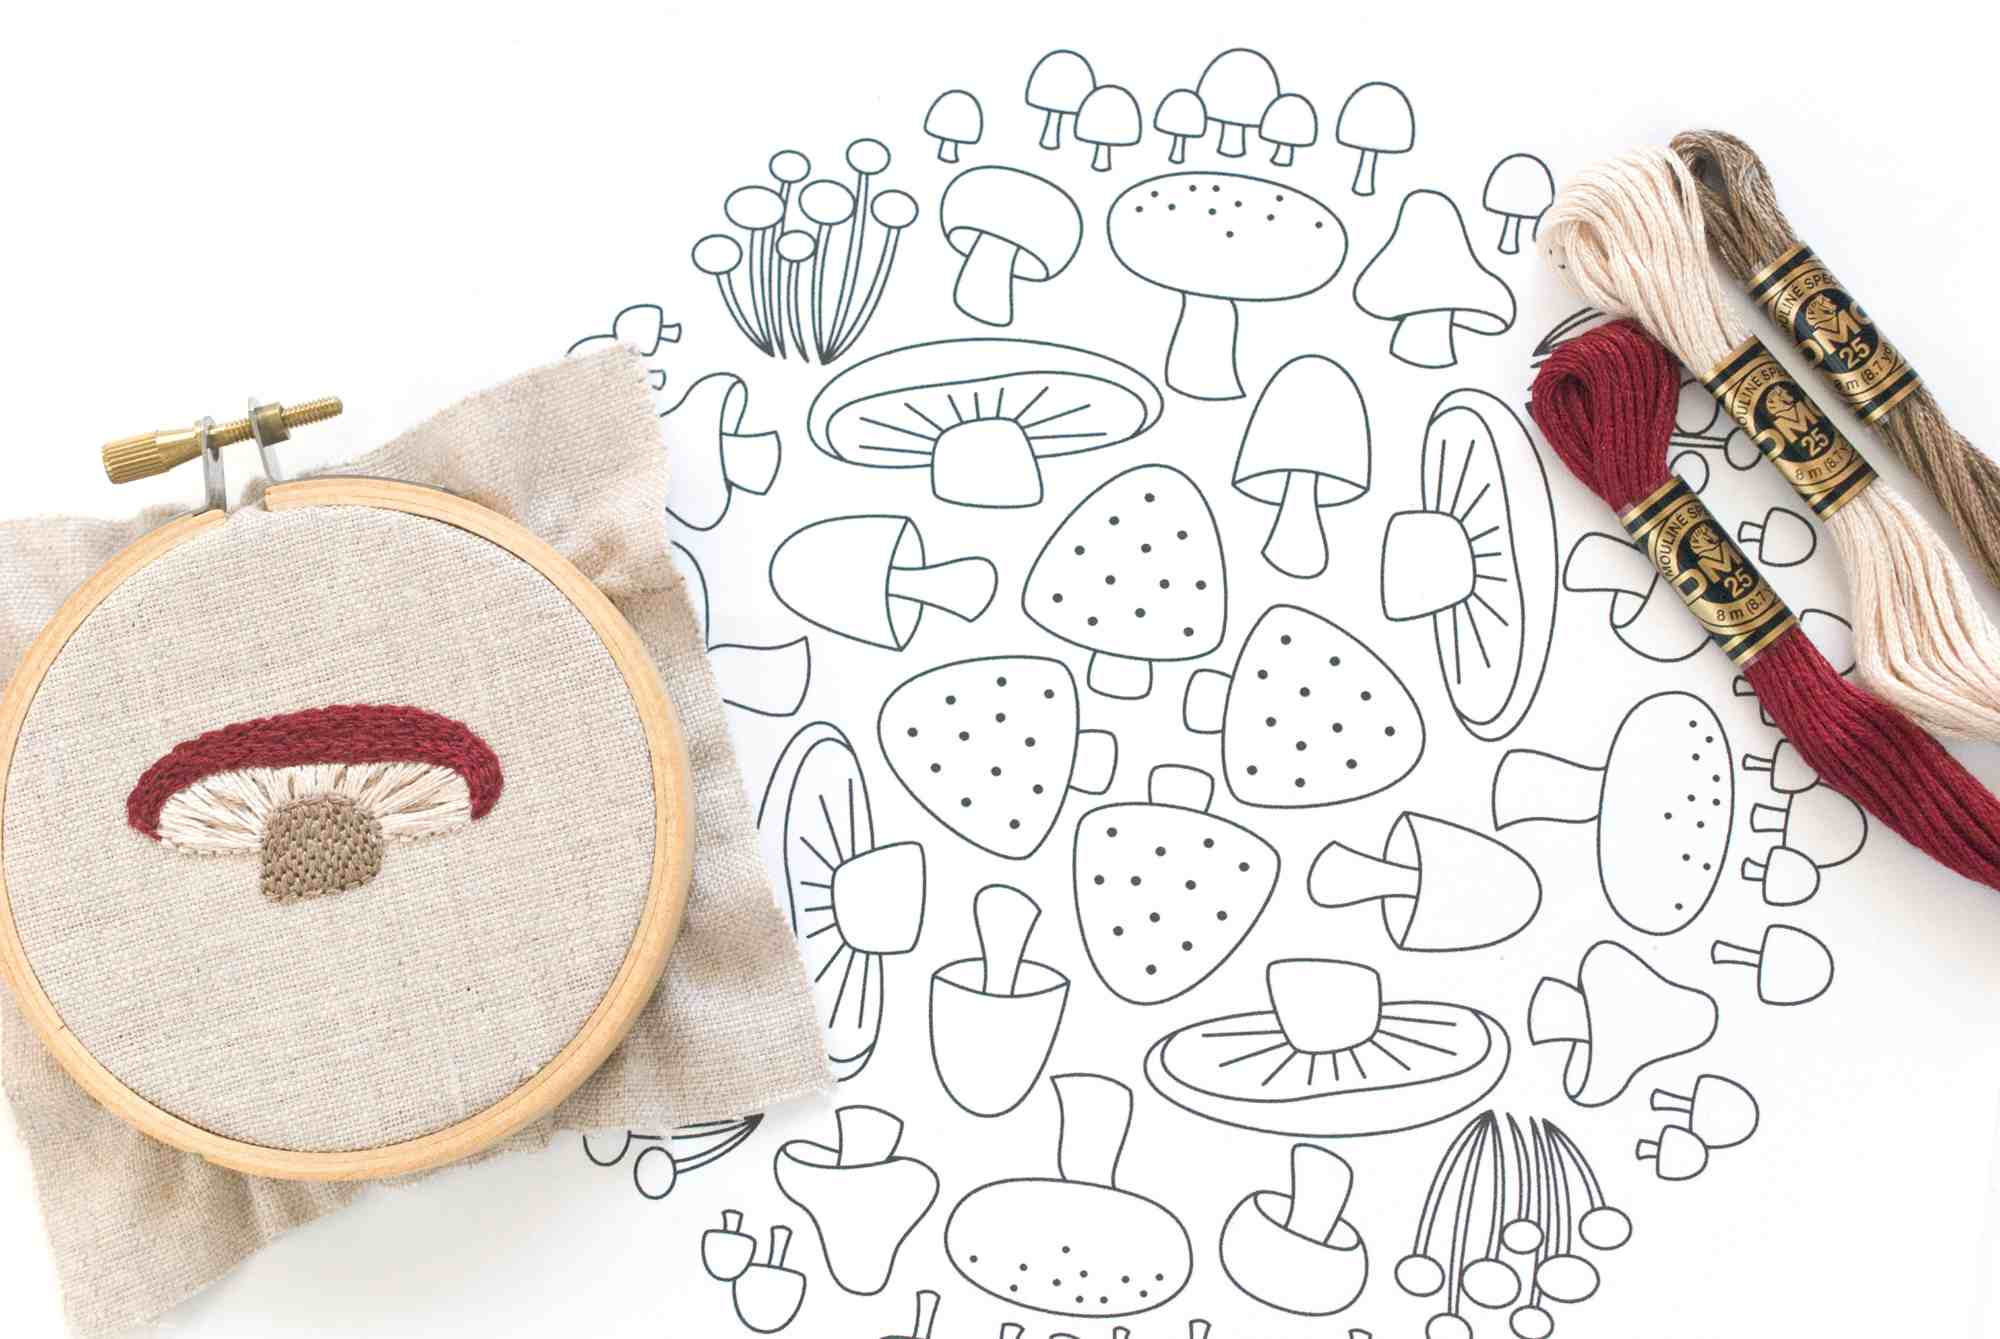 Free Embroidery Pattern Our Top 25 Free Embroidery Designs